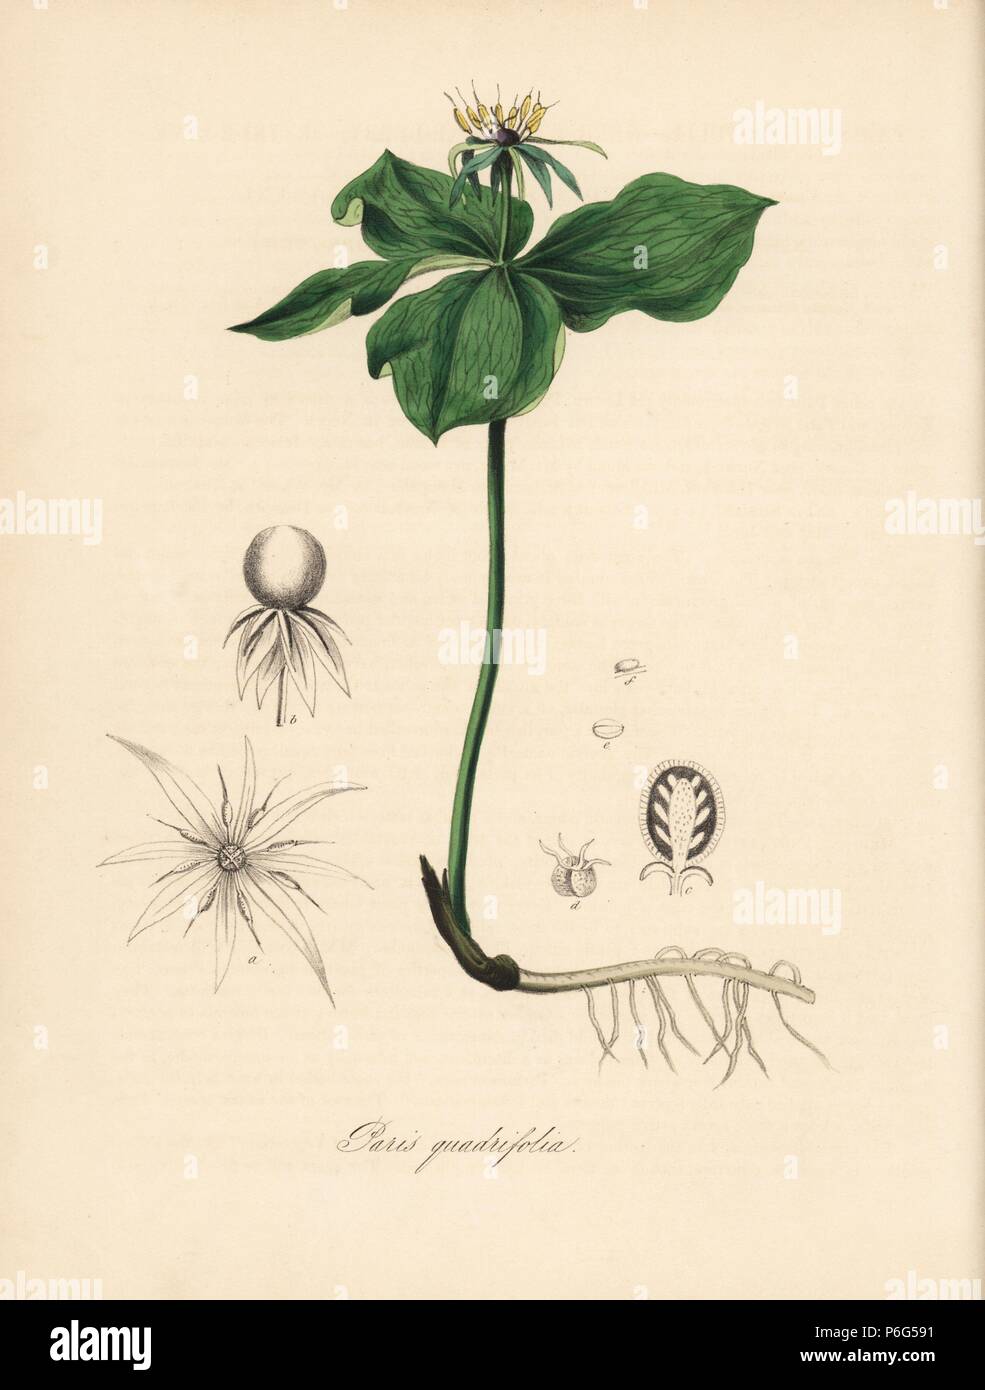 Herb Paris, Paris quadrifolia. Handcoloured zincograph by C. Chabot drawn by Miss M. A. Burnett from her 'Plantae Utiliores: or Illustrations of Useful Plants,' Whittaker, London, 1842. Miss Burnett drew the botanical illustrations, but the text was chiefly by her late brother, British botanist Gilbert Thomas Burnett (1800-1835). Stock Photo